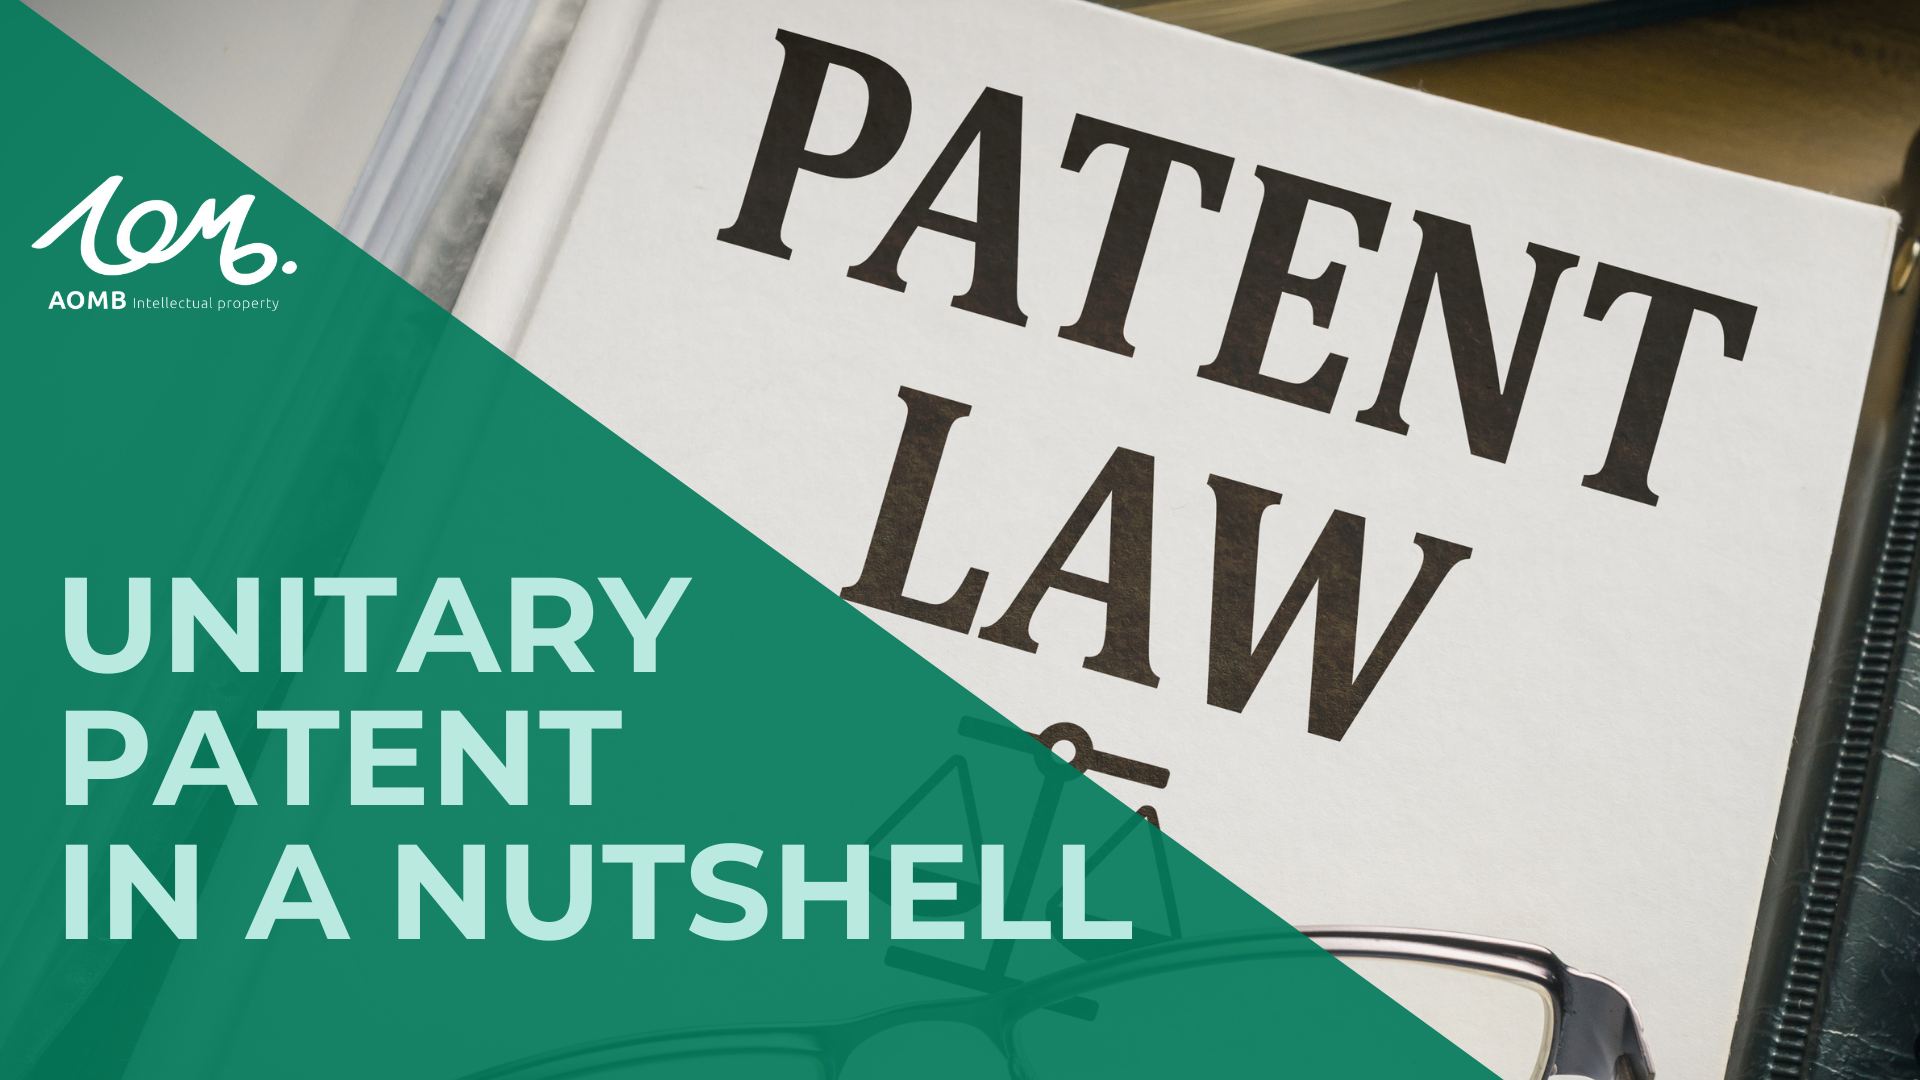 Unitary patent in a nutshell